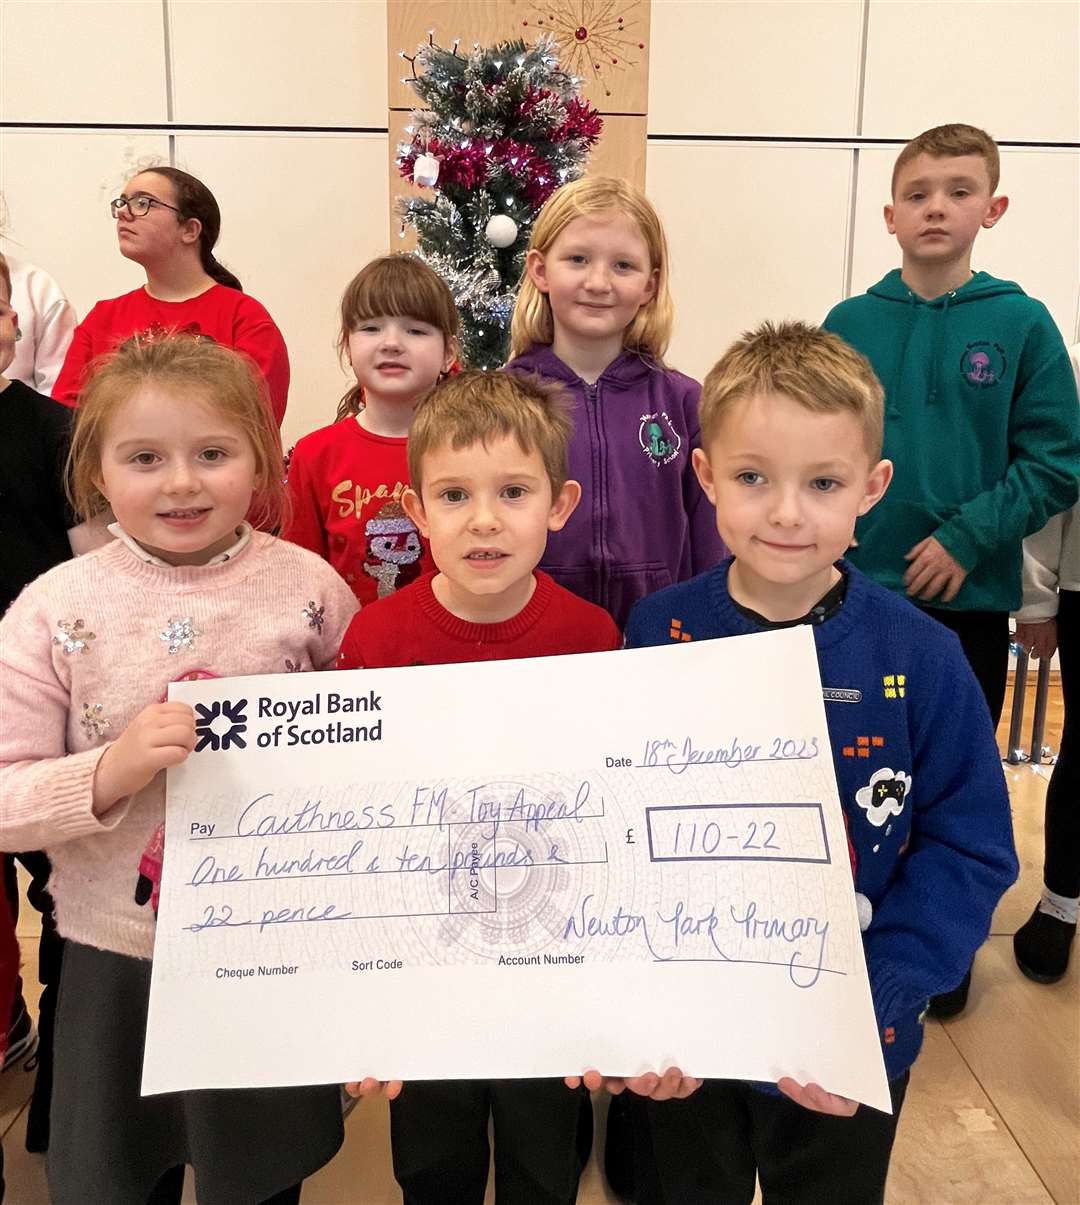 Newton Park pupils with the cheque for the Caithness FM Toy Appeal.